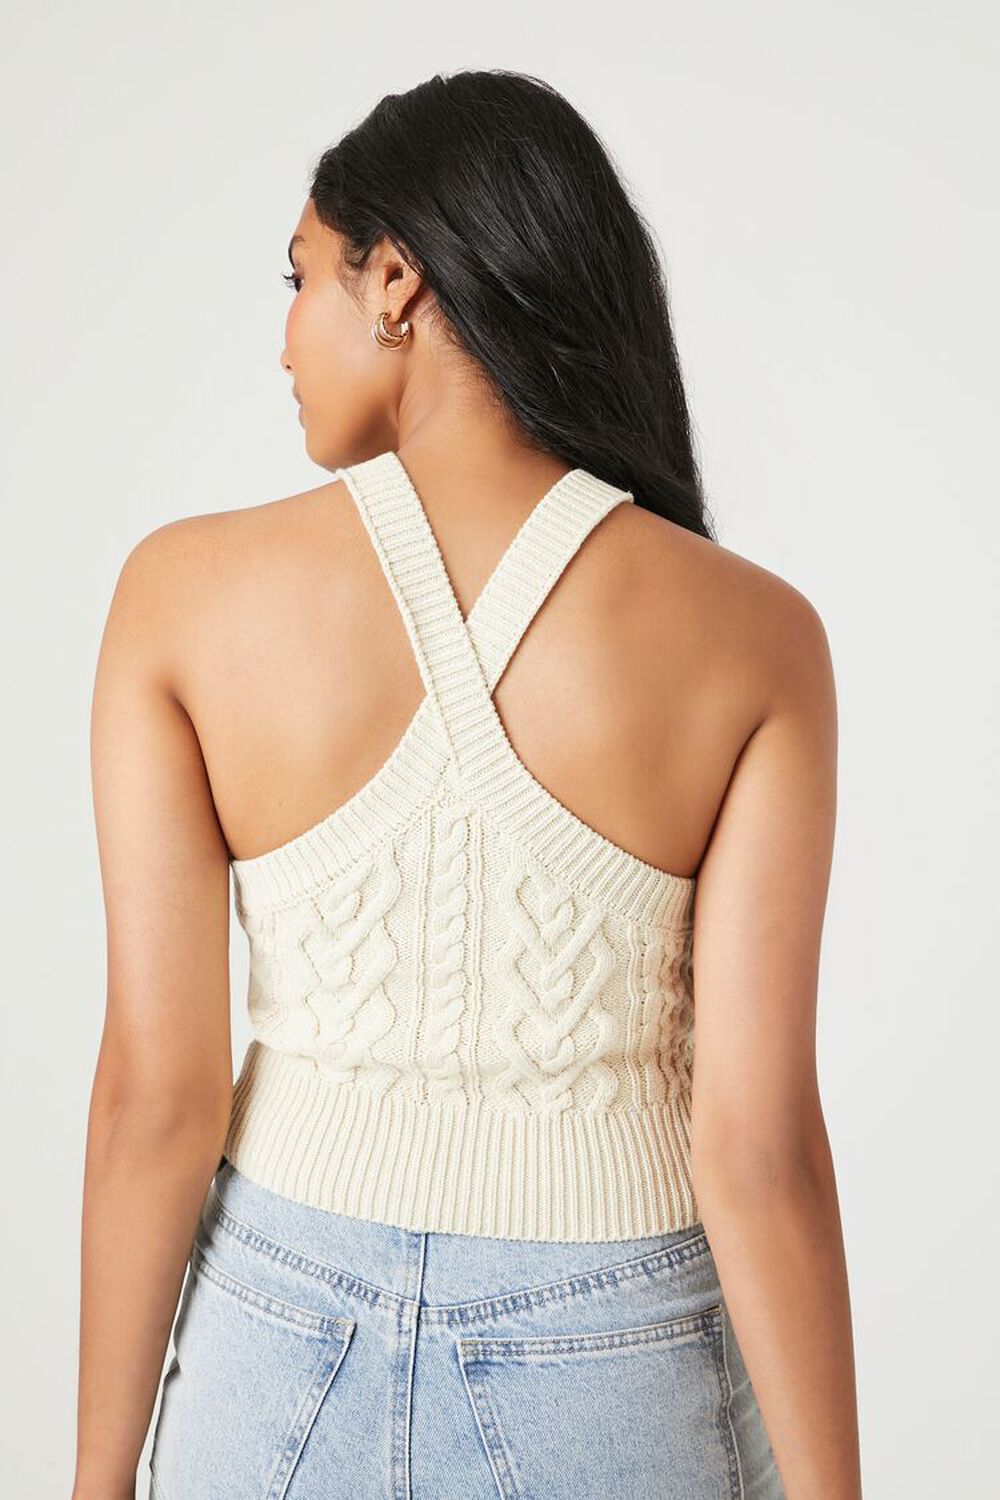 OATMEAL Cable Knit Halter Crop Top, image 3